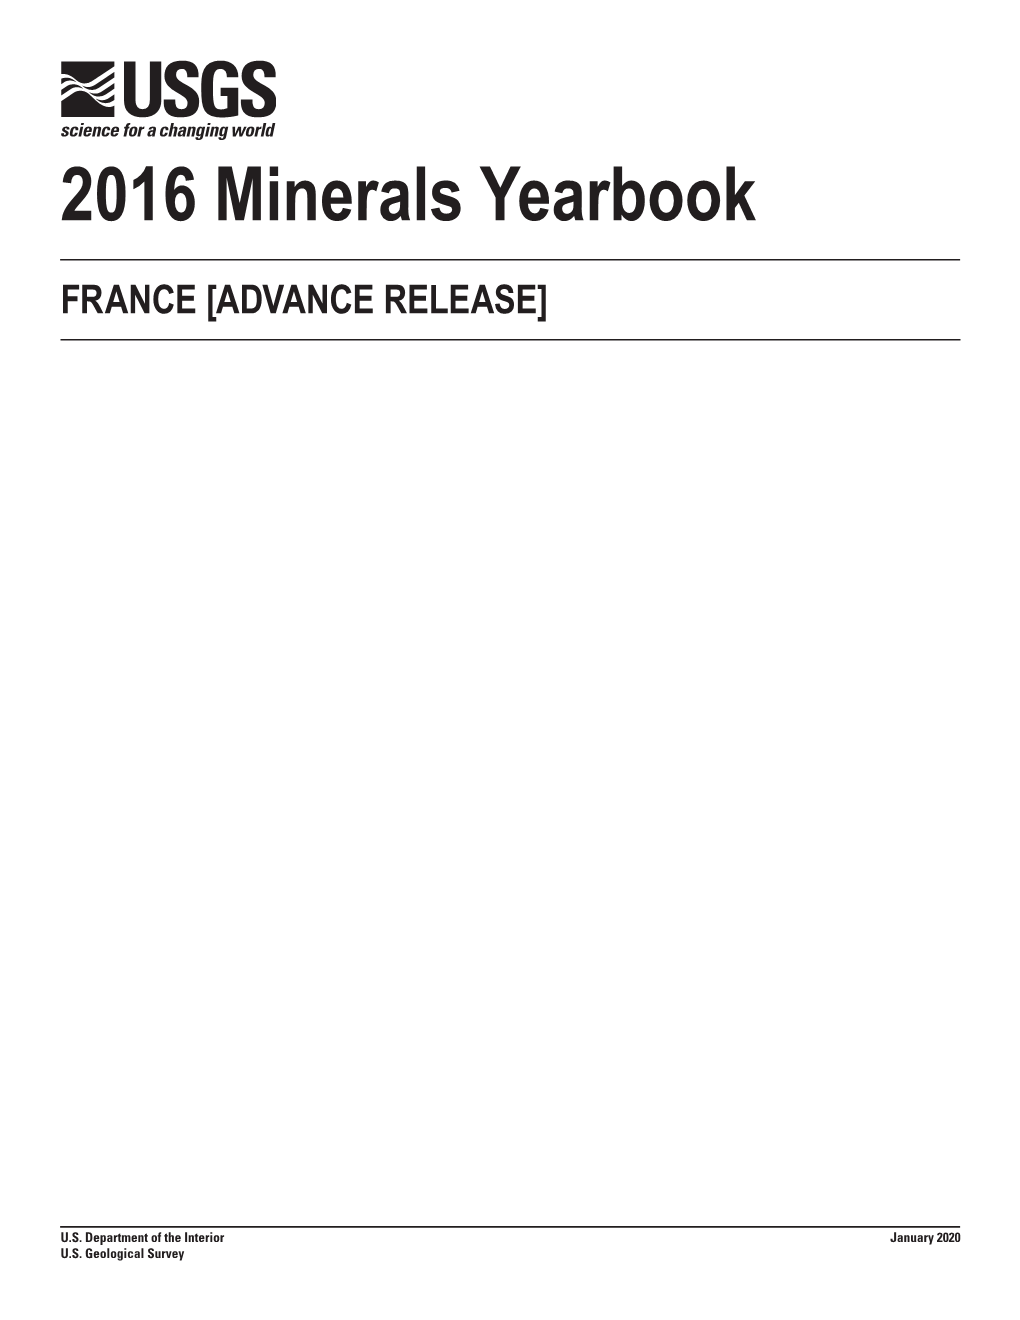 The Mineral Industry of France in 2016